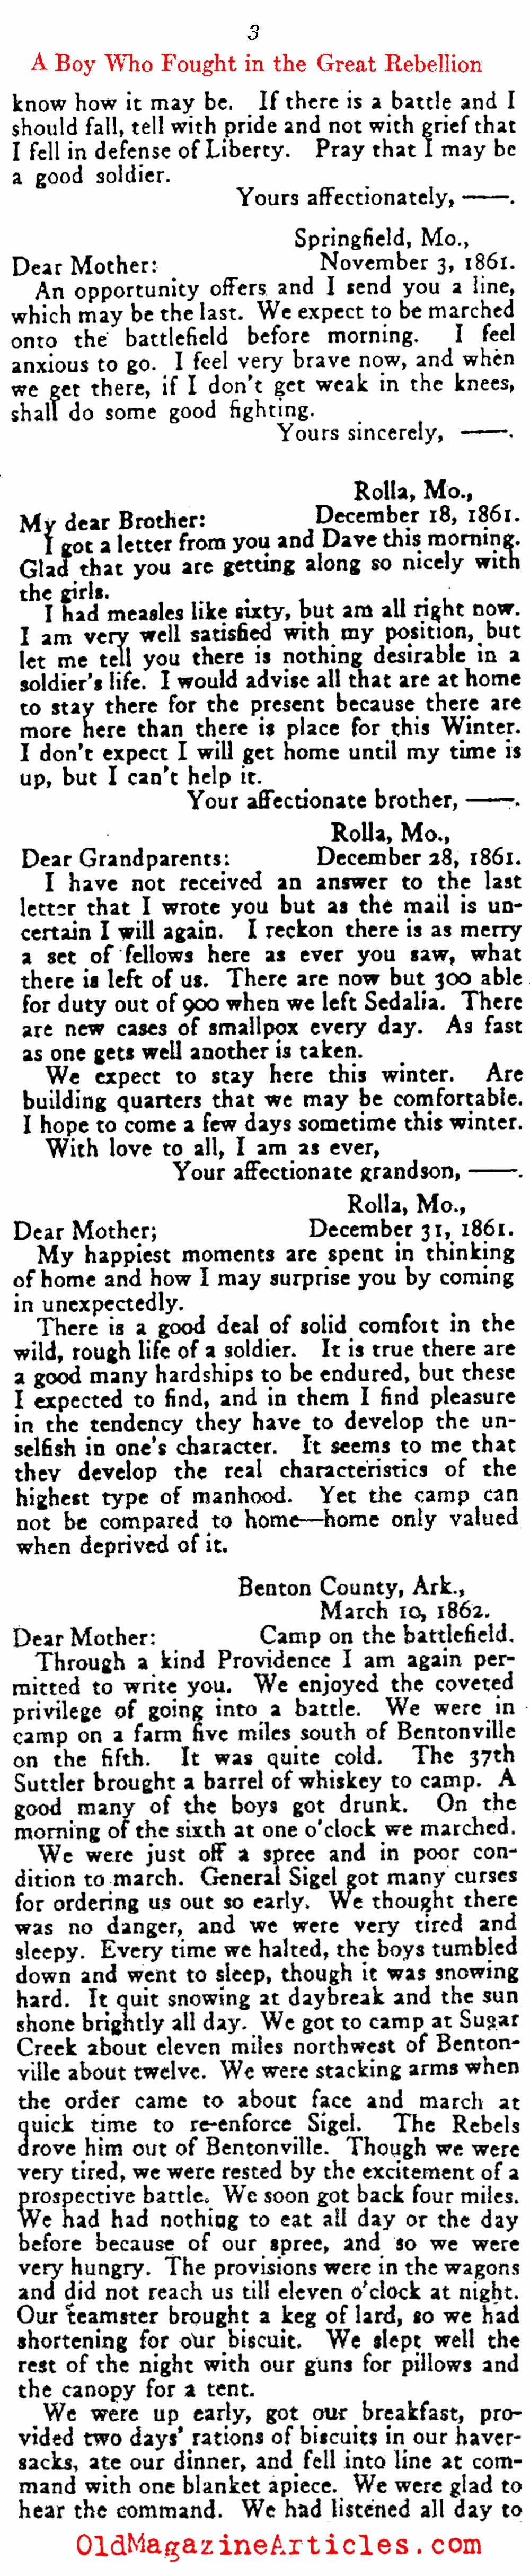 ''How Did it Feel to be a Soldier?'' (Outing Magazine, 1917)